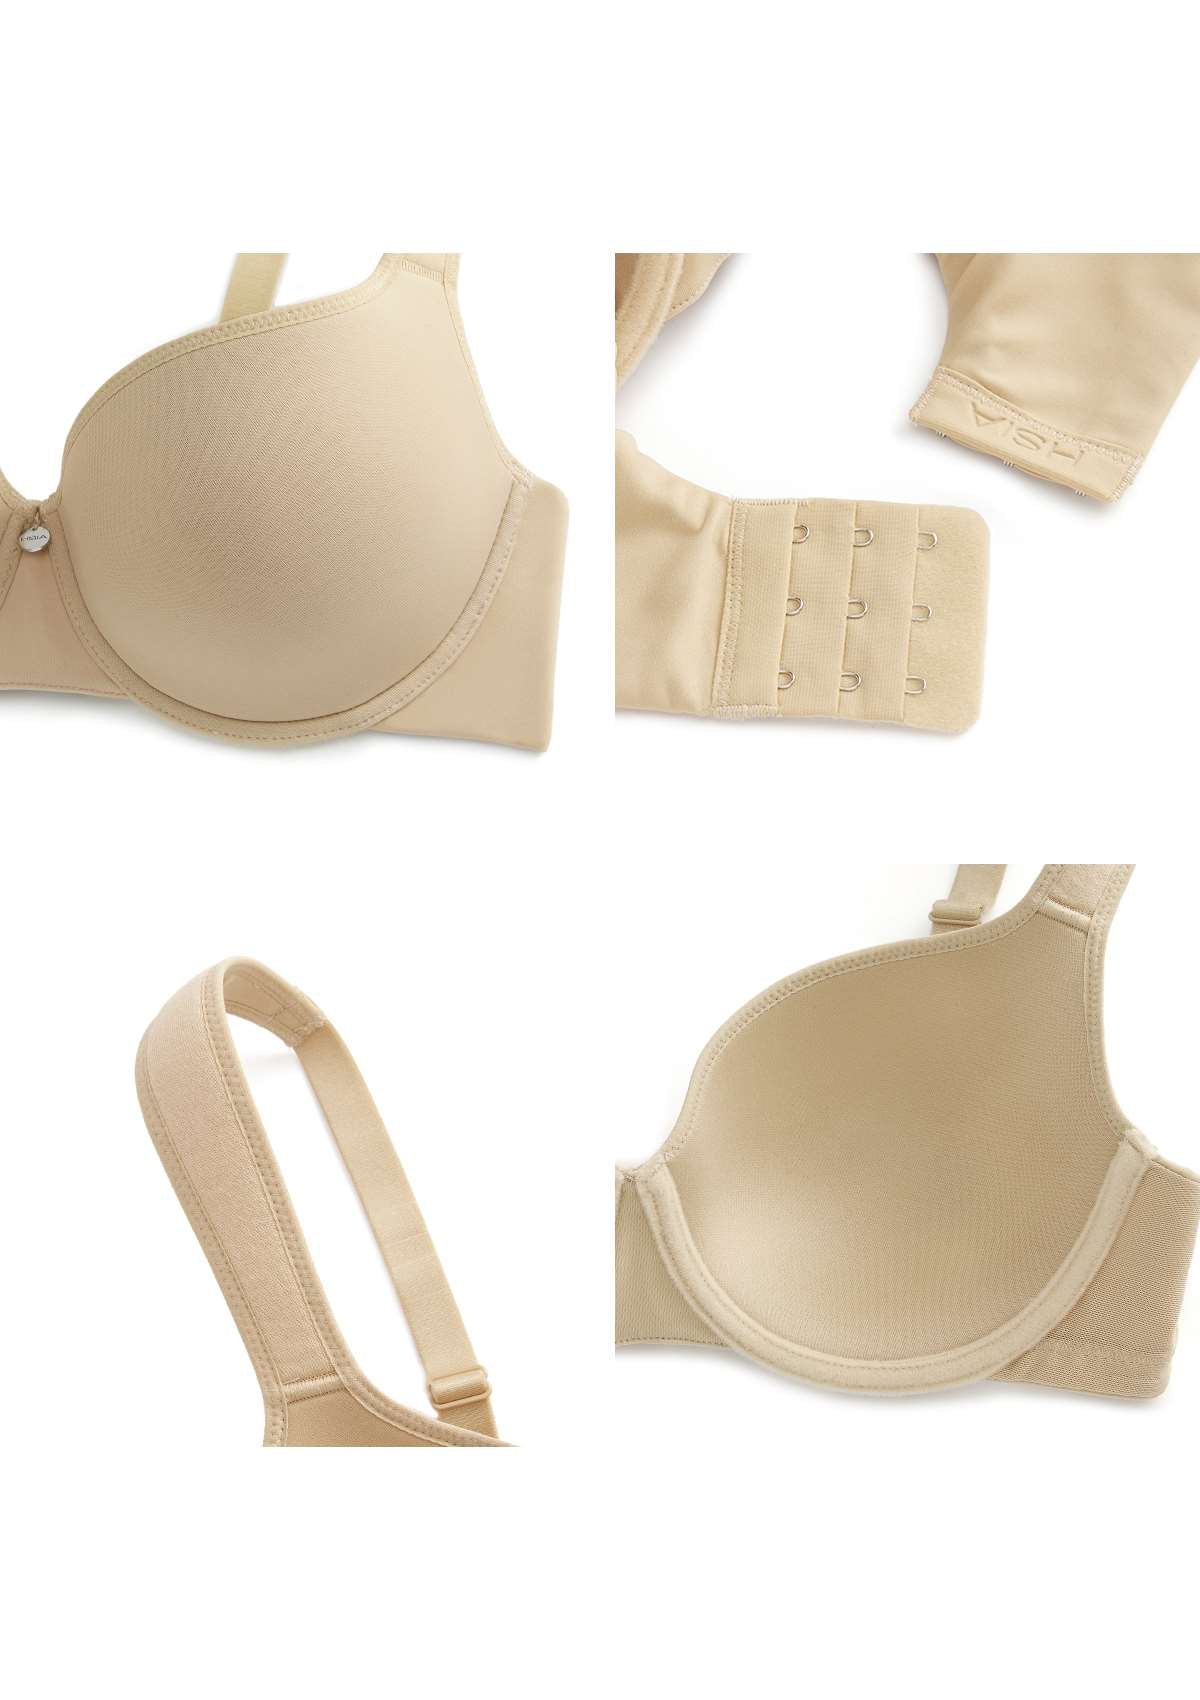 HSIA Patricia Seamless Lightly Padded Minimizer Bra -for Bigger Busts - Beige / 34 / G